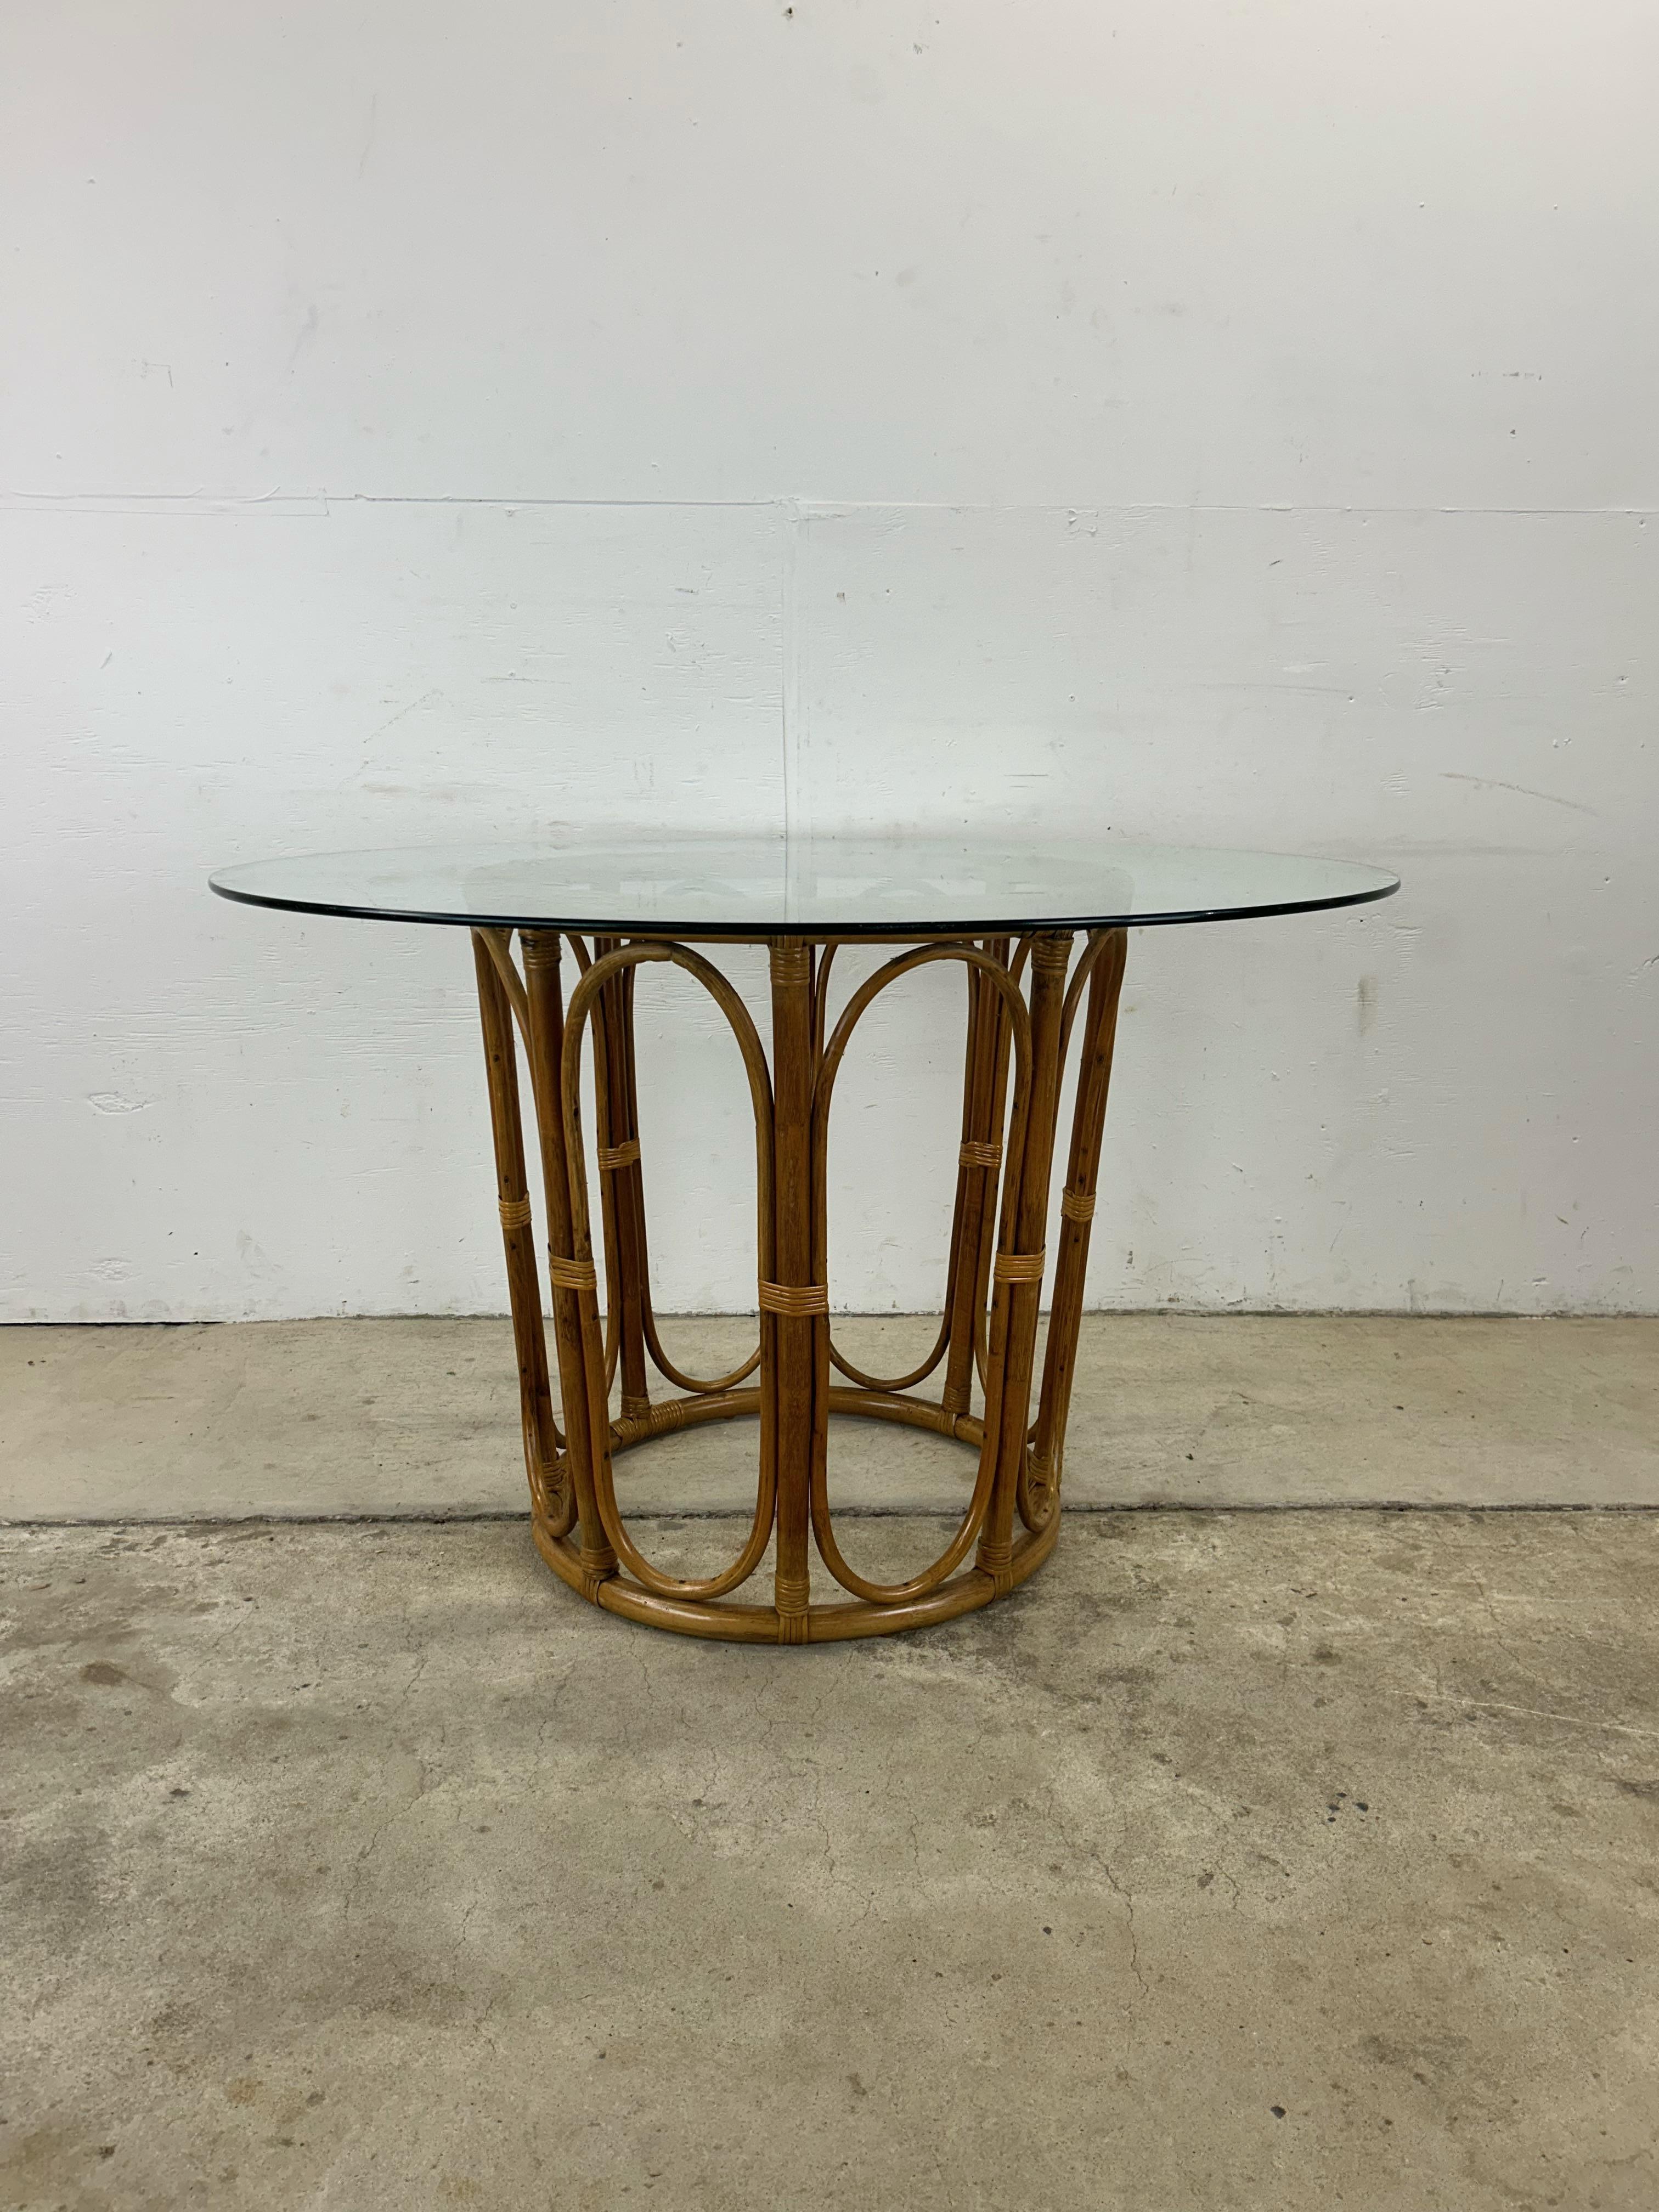 This vintage dining table features round glass top, rattan pedestal base with original finish.

Matching set of chairs and several similar rattan pieces available separately. 

Dimensions: 48.25w 48.25d 30h

Condition: Original rattan finish is in